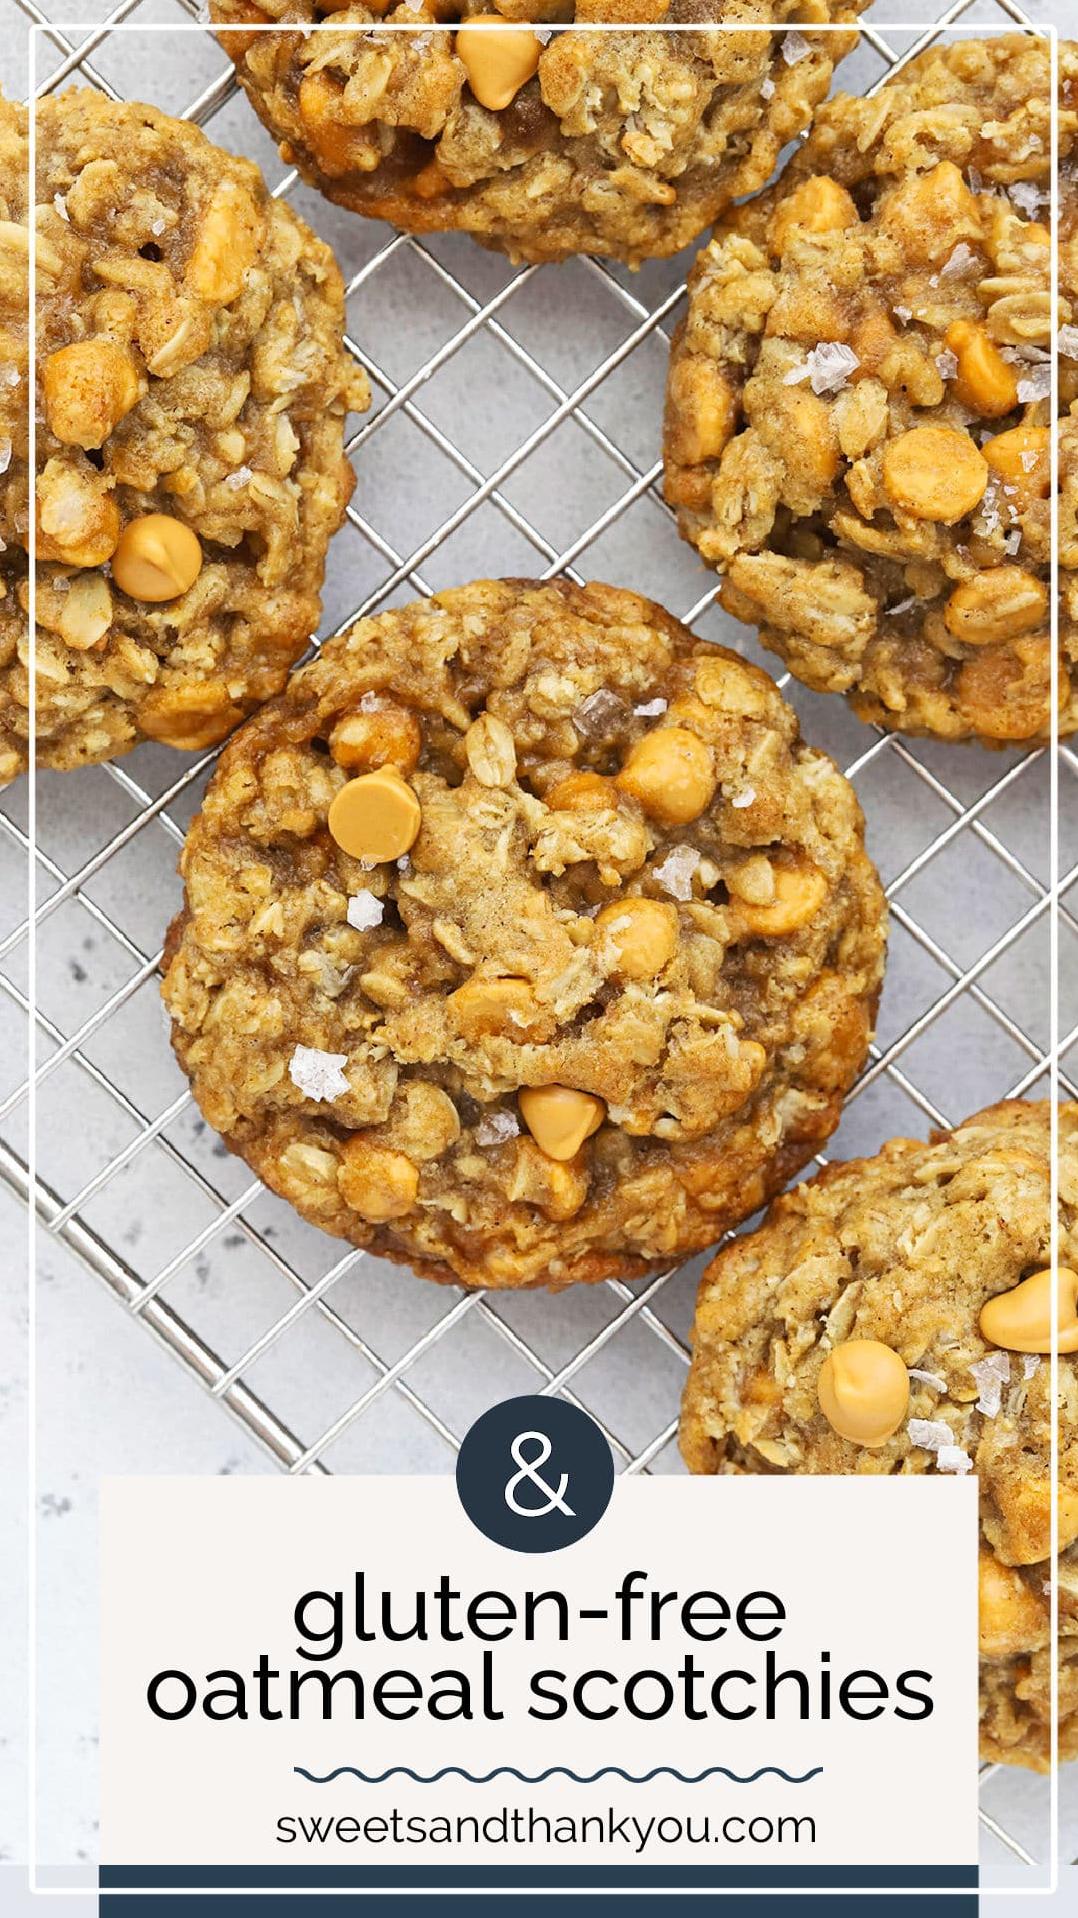  Perfectly Gluten Free and Dairy Free, These Cookies are Sure to Impress